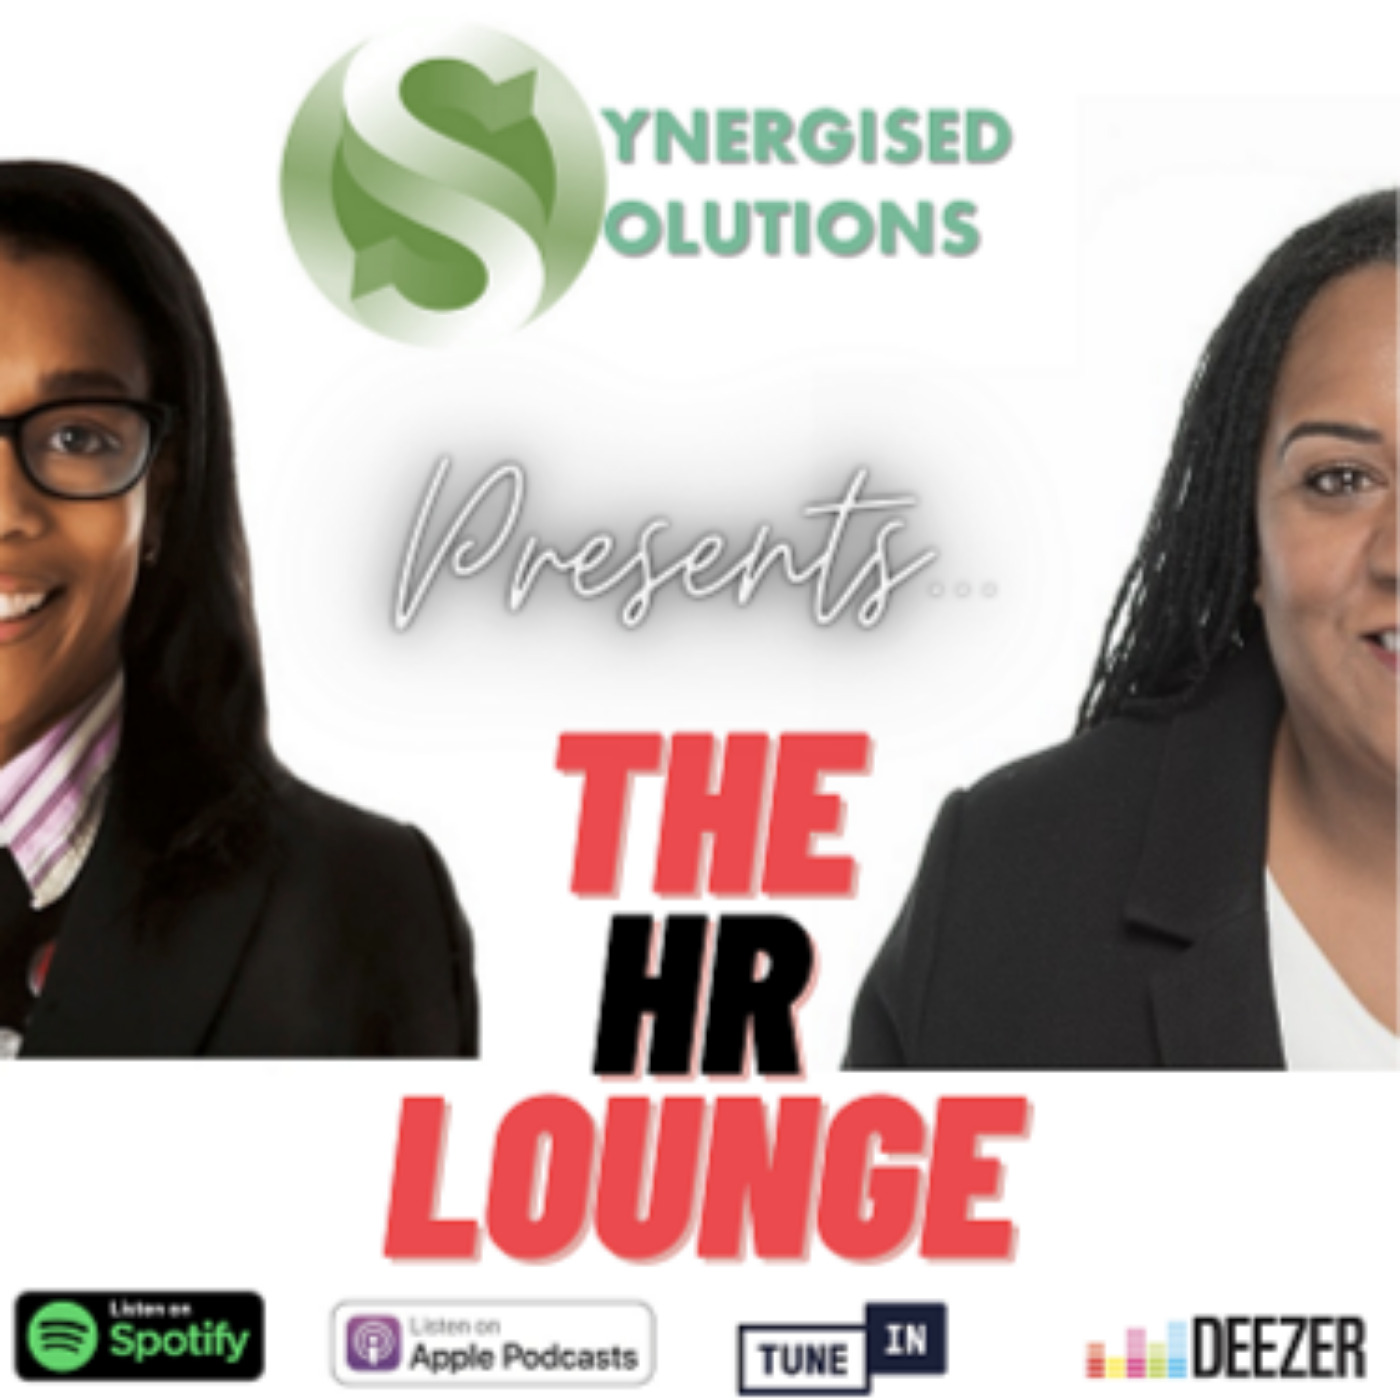 Synergised Solutions Presents... The HR Lounge